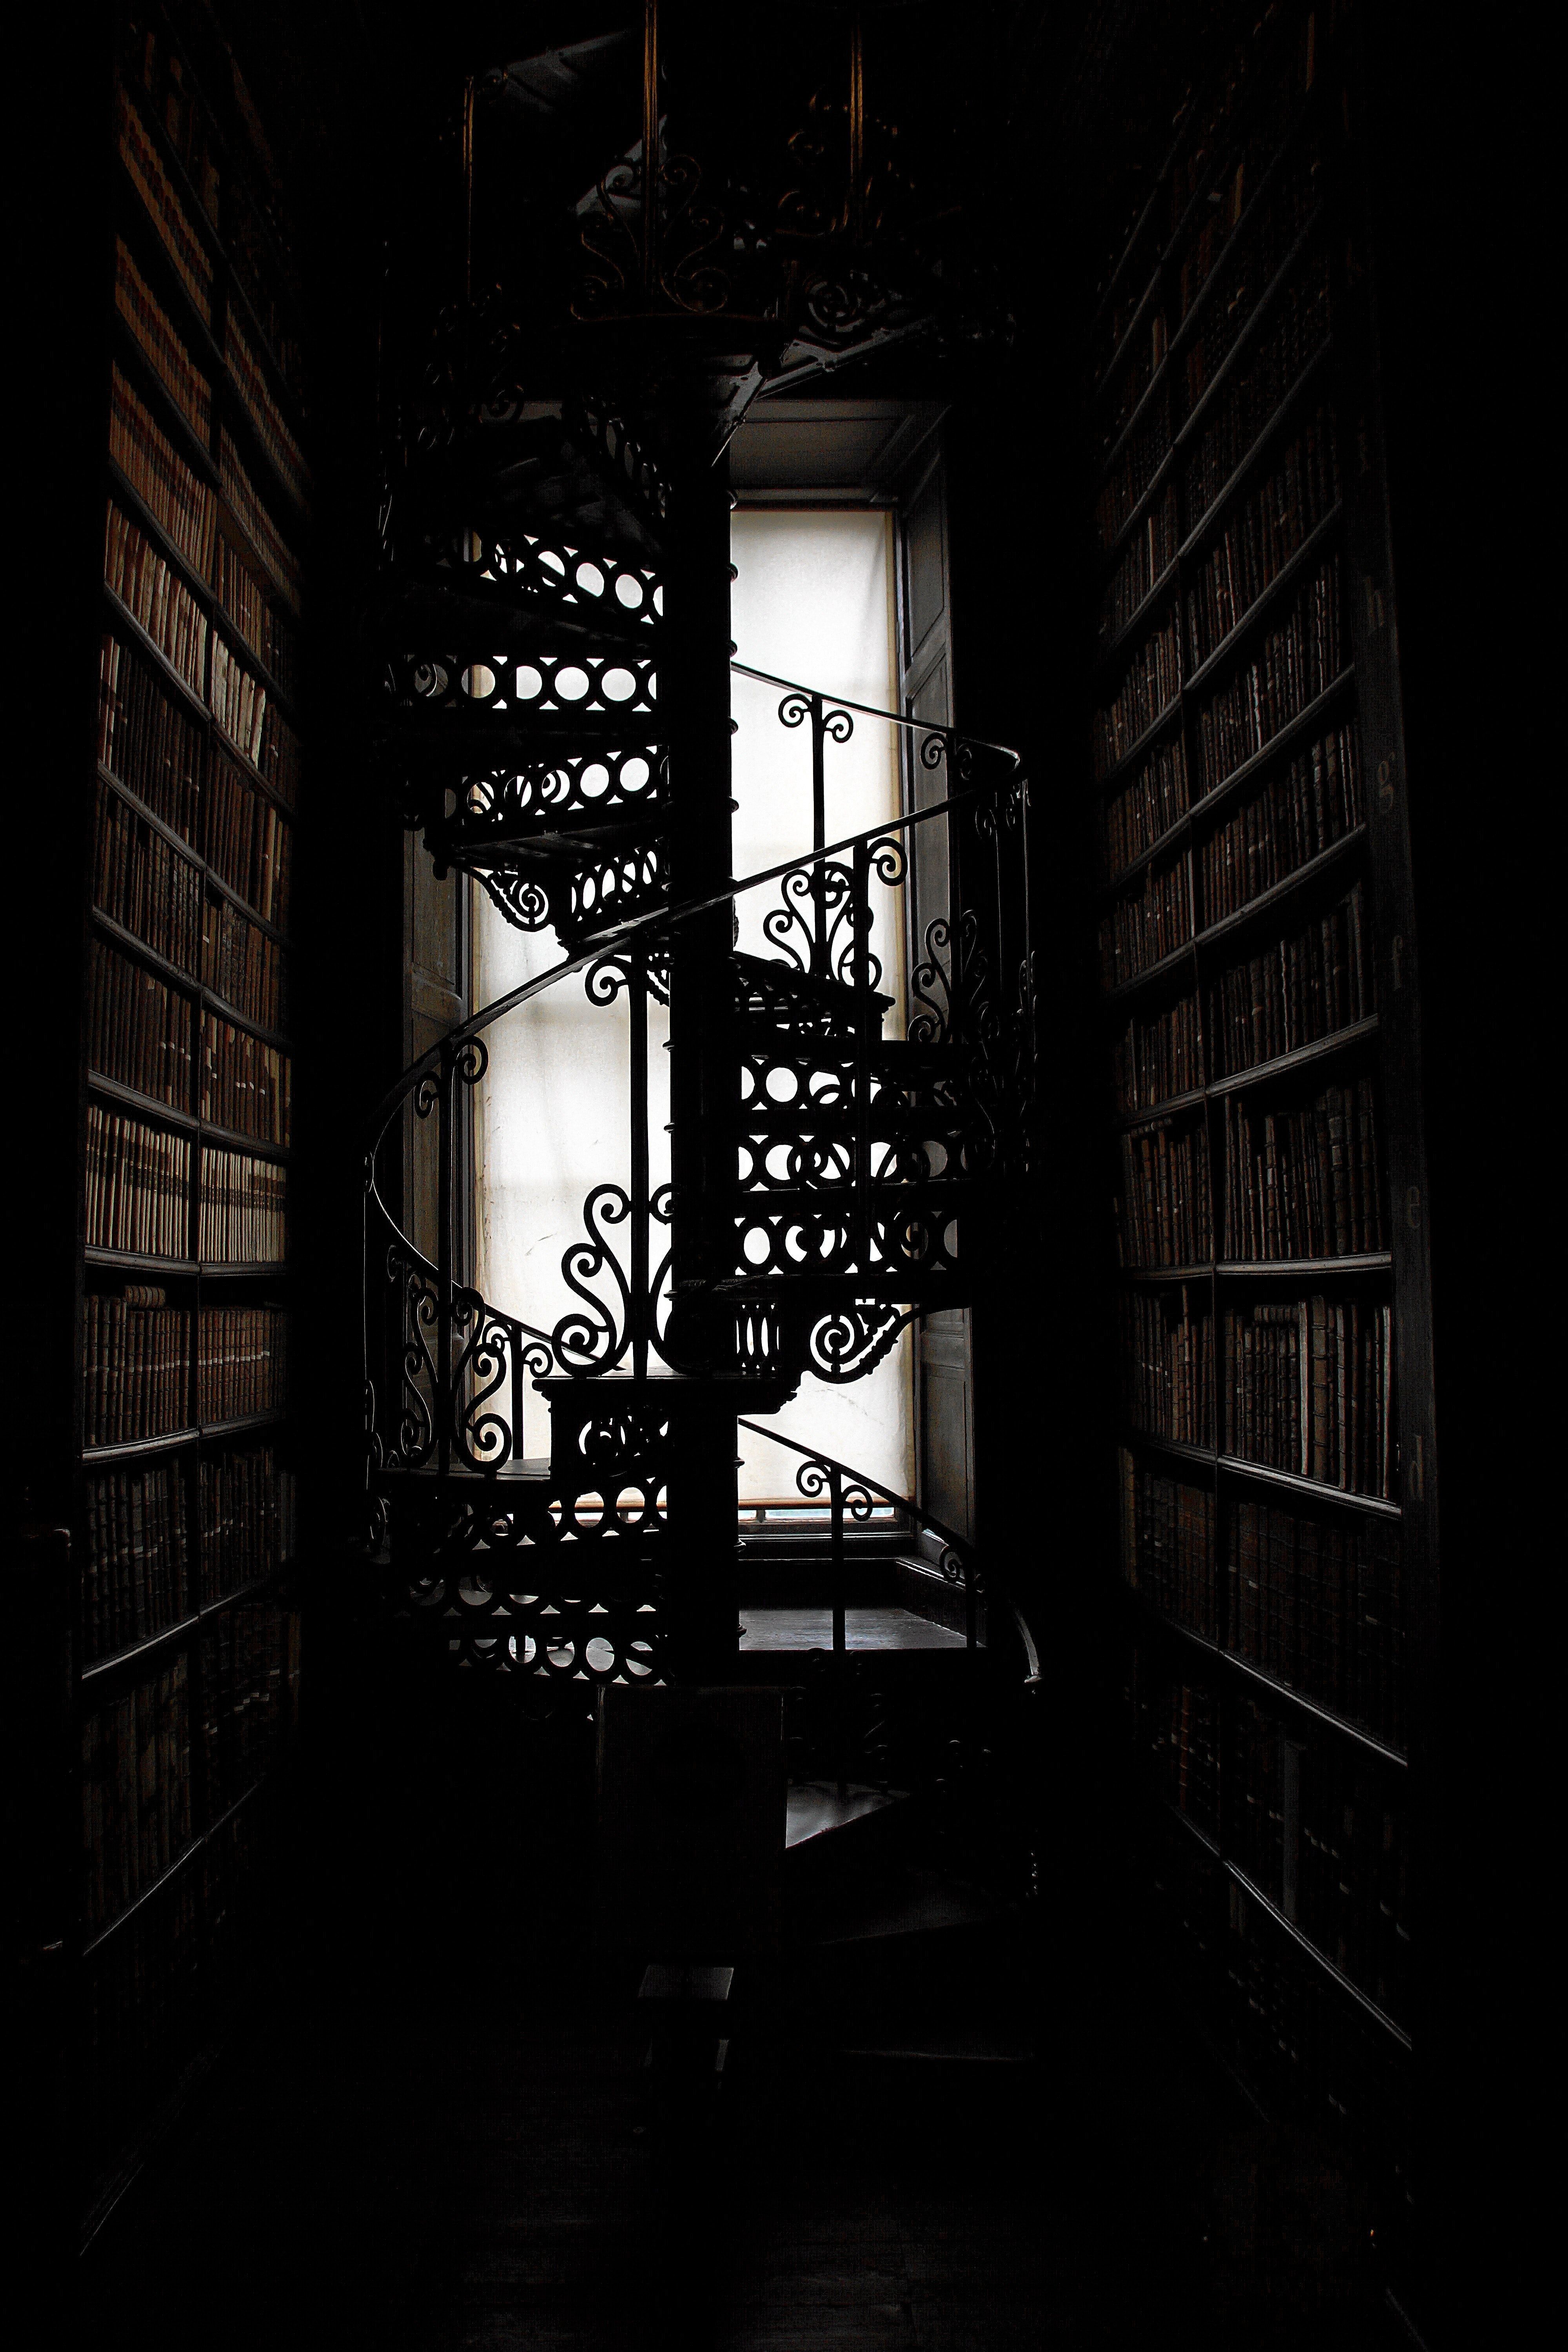 A spiral staircase in the middle of books - Dark academia